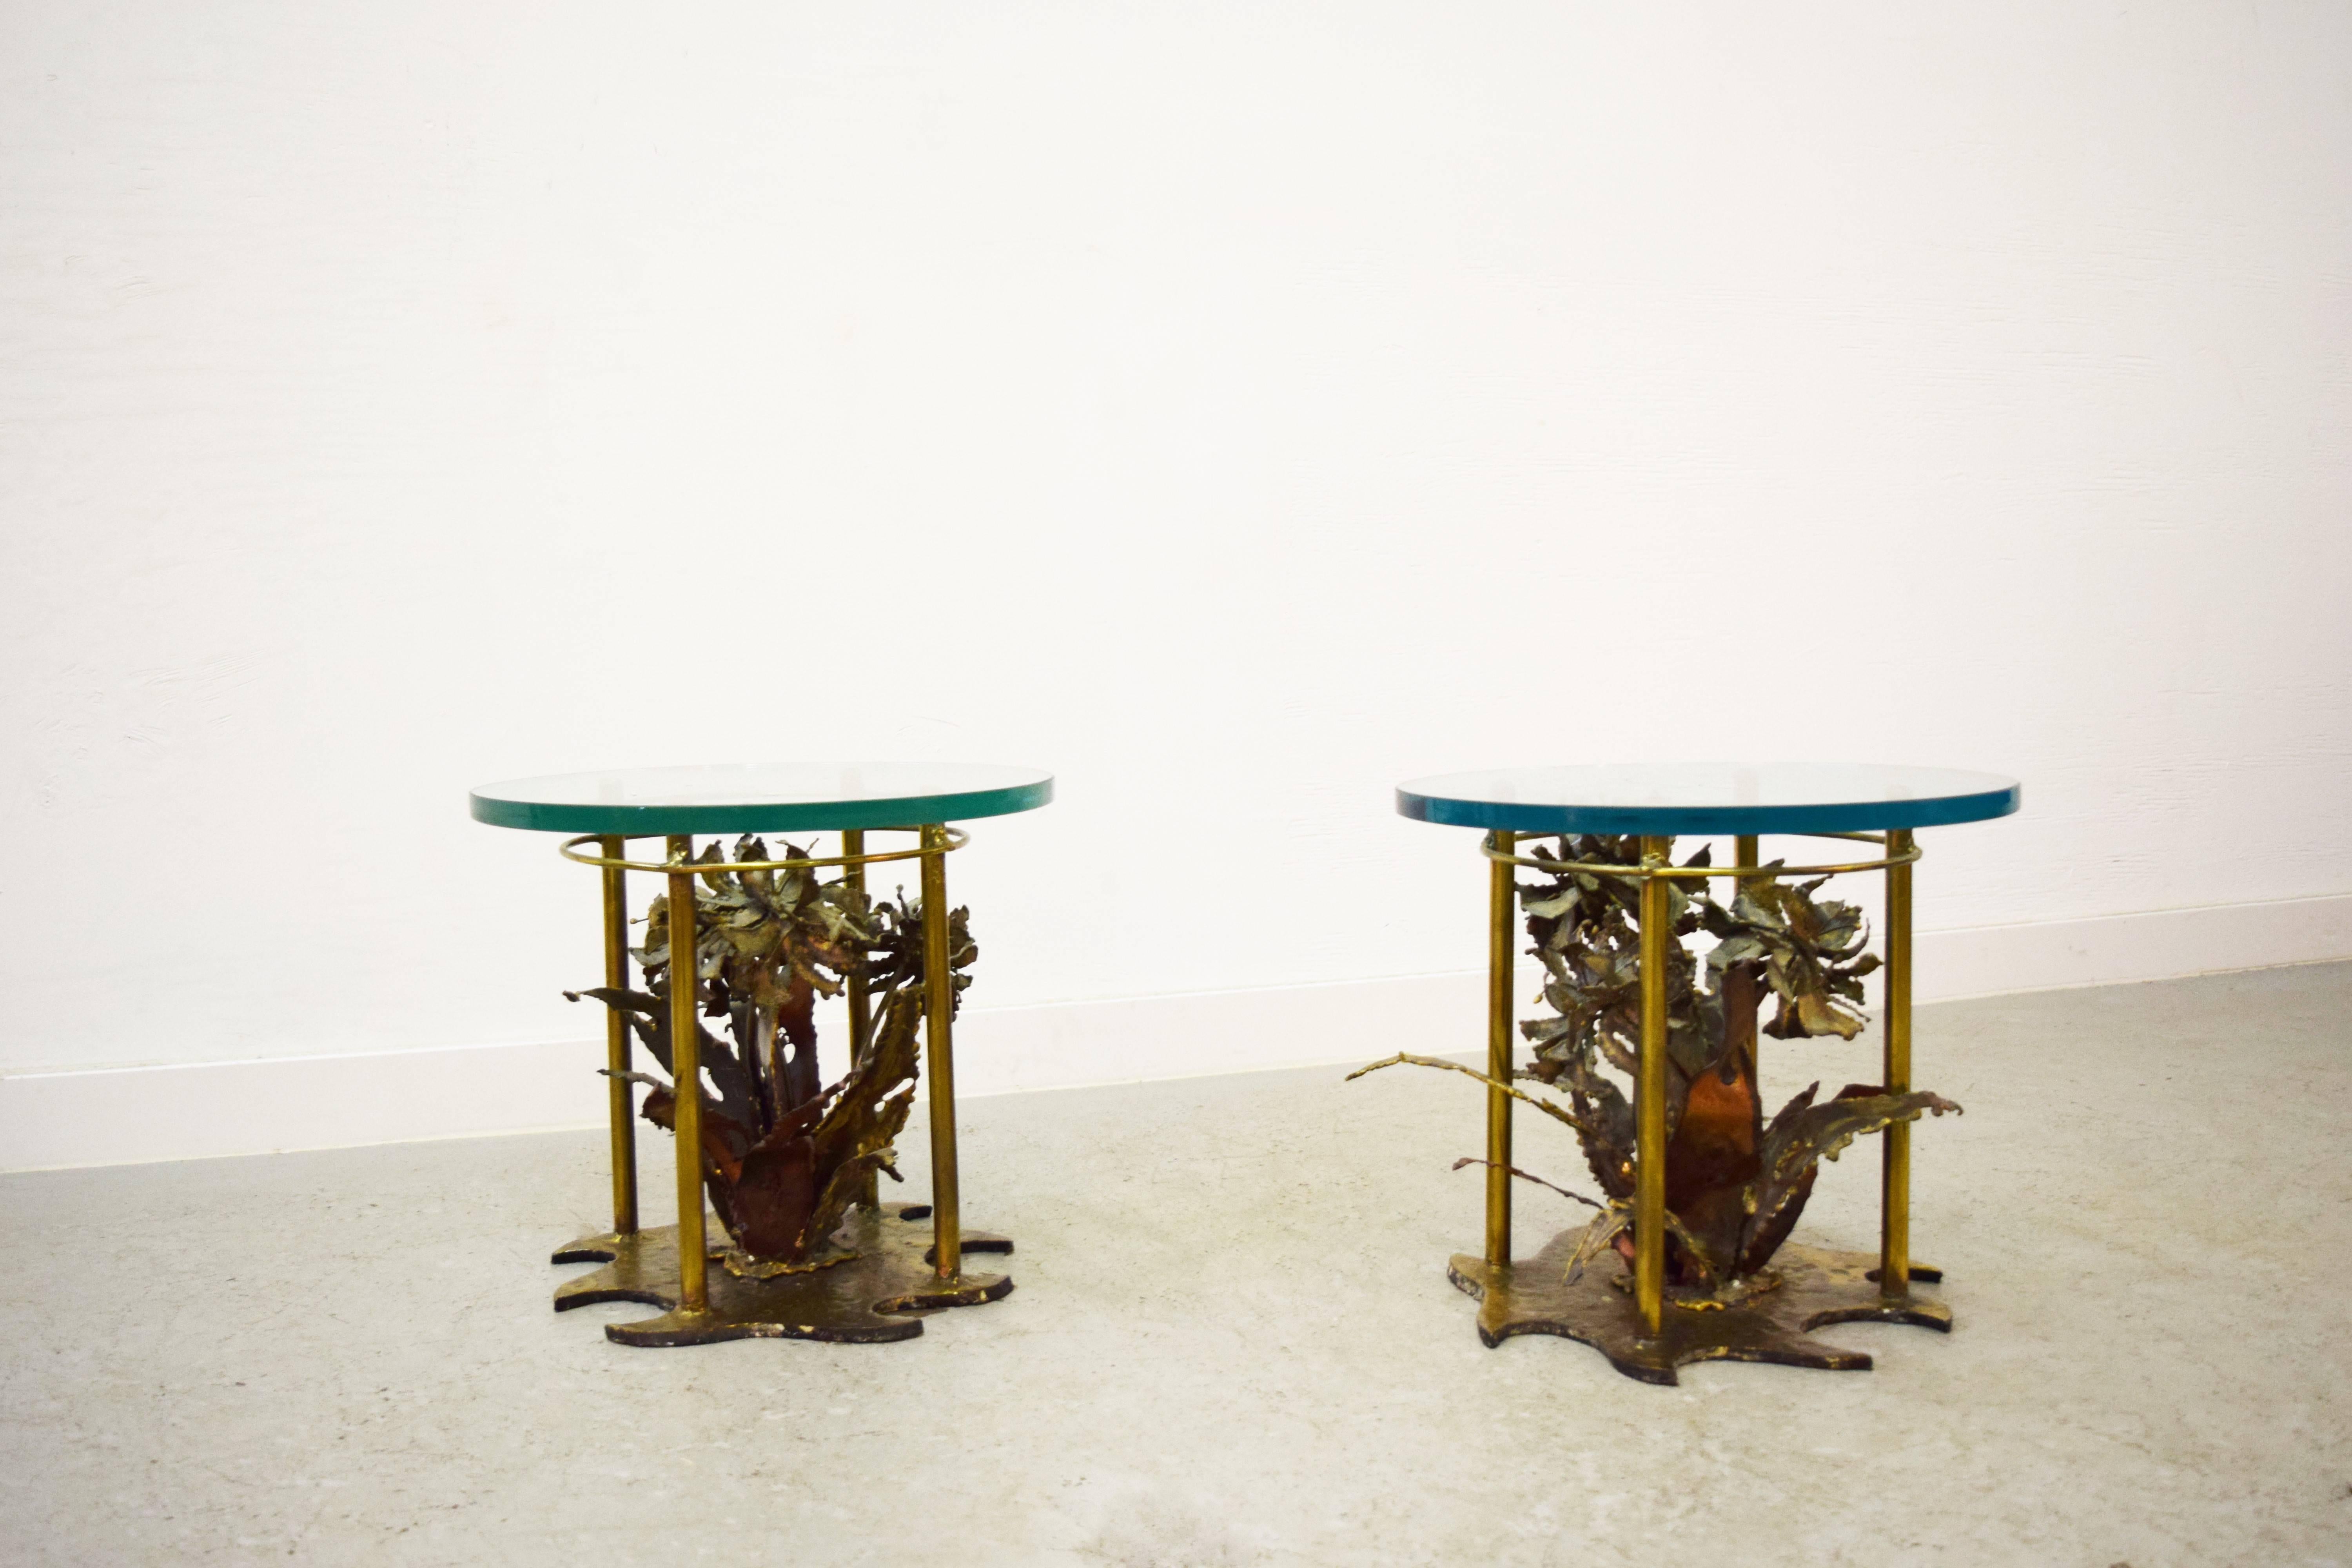 Pair of Silas Seandel side tables. Signed and dated 1973.